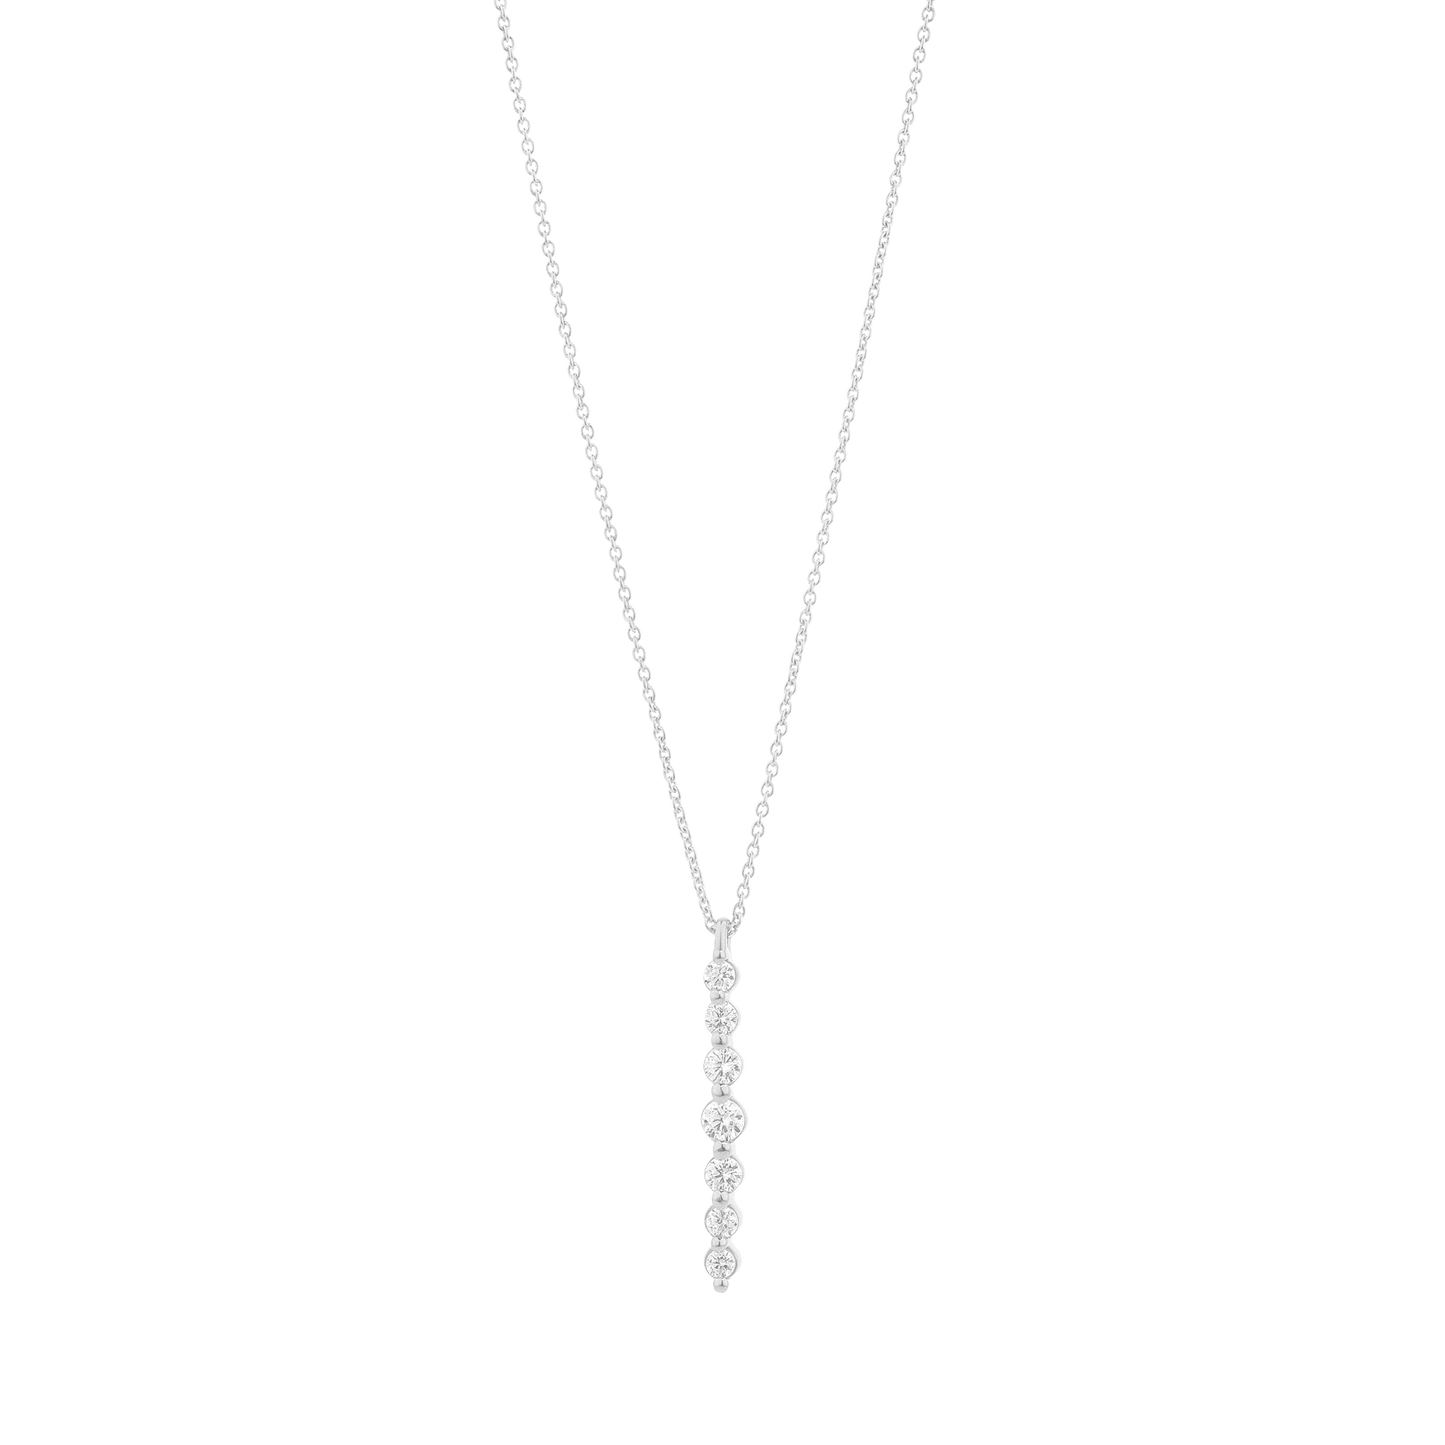 Vertical 7 Diamonds Bar Necklace - 14K Yellow Gold Necklaces magal-dev 